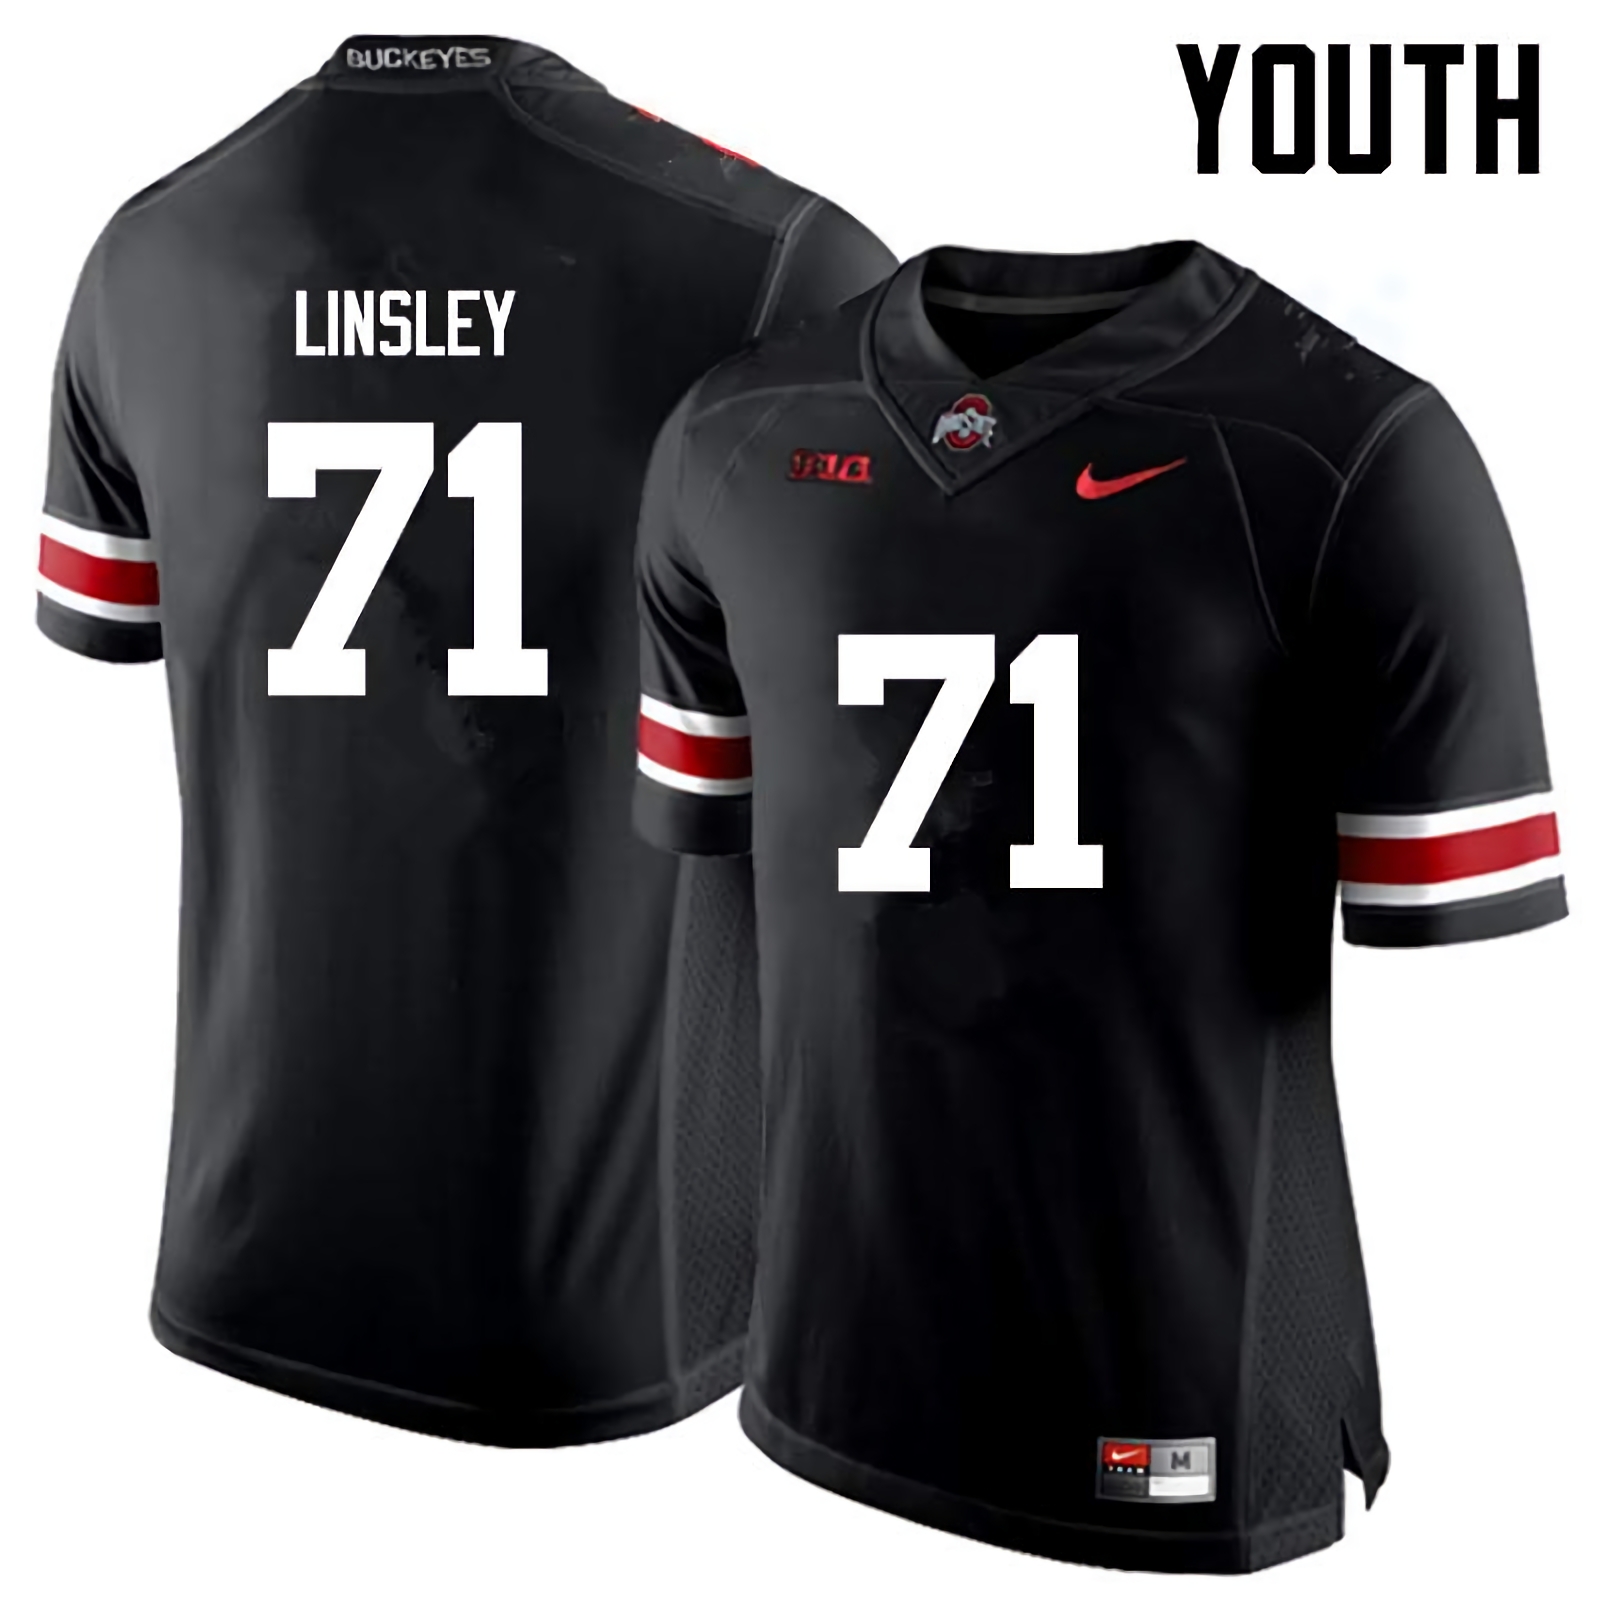 Corey Linsley Ohio State Buckeyes Youth NCAA #71 Nike Black College Stitched Football Jersey PGV3056OF